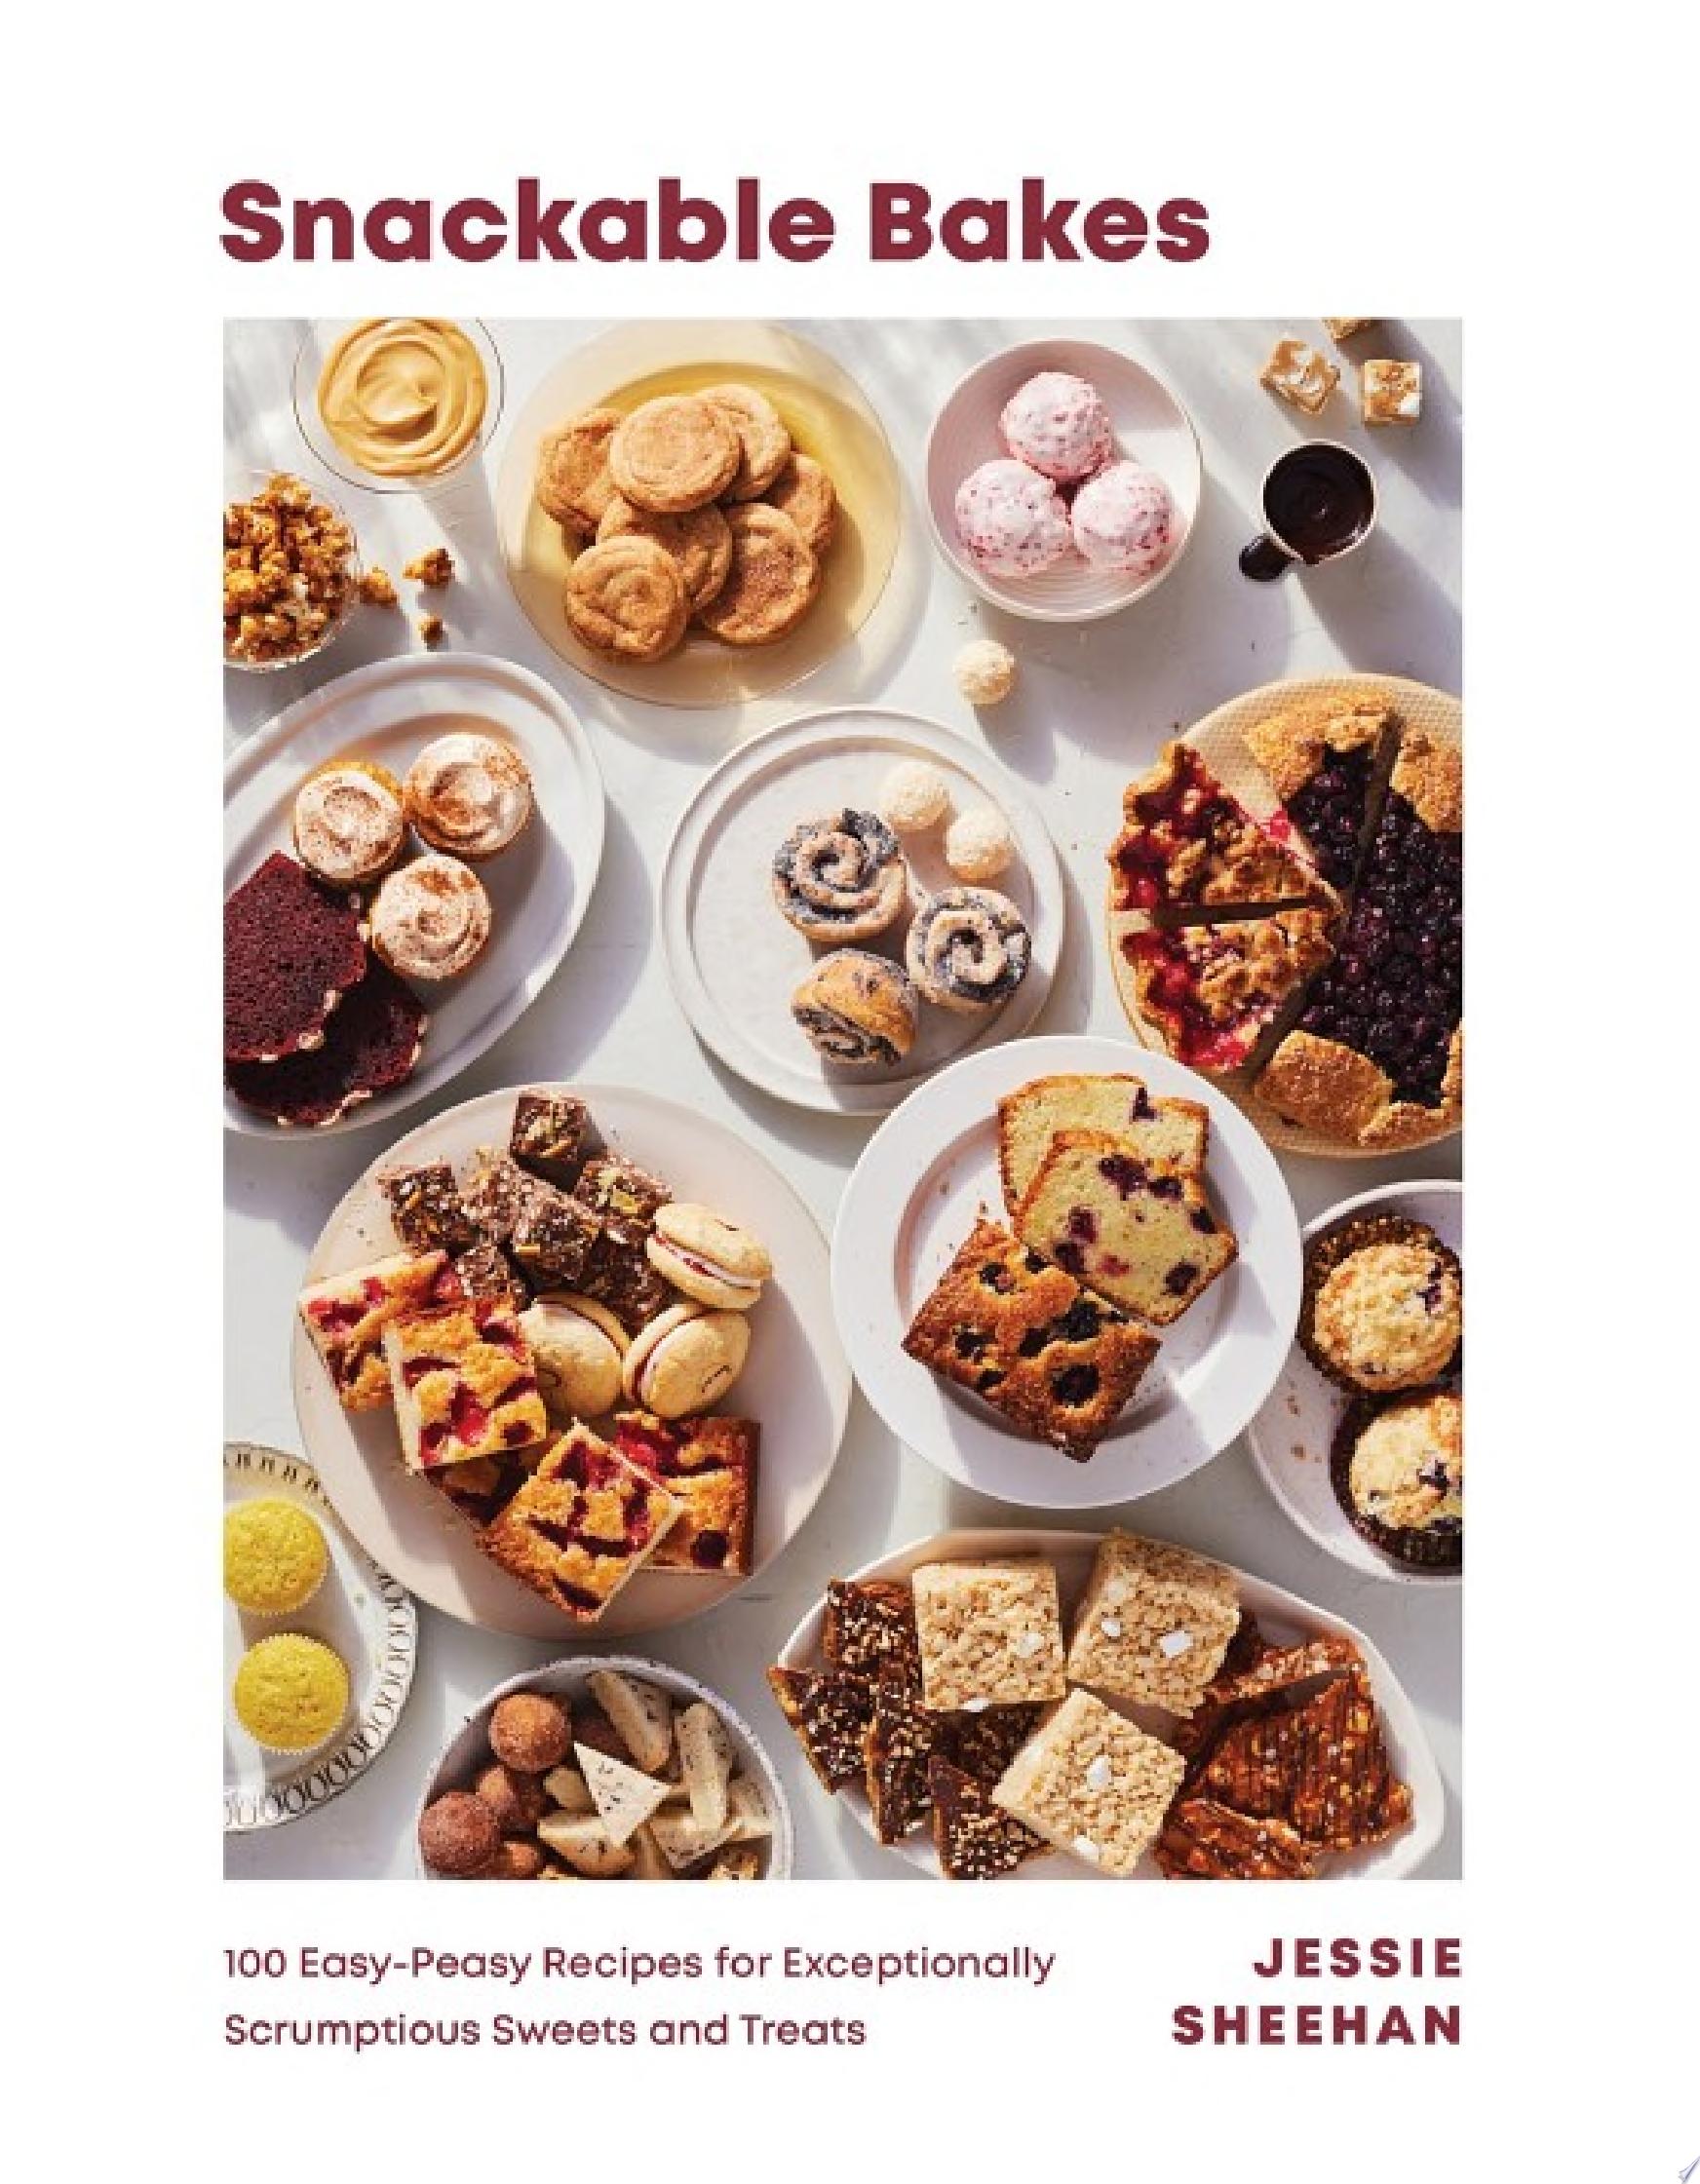 Image for "Snackable Bakes: 100 Easy-Peasy Recipes for Exceptionally Scrumptious Sweets and Treats"